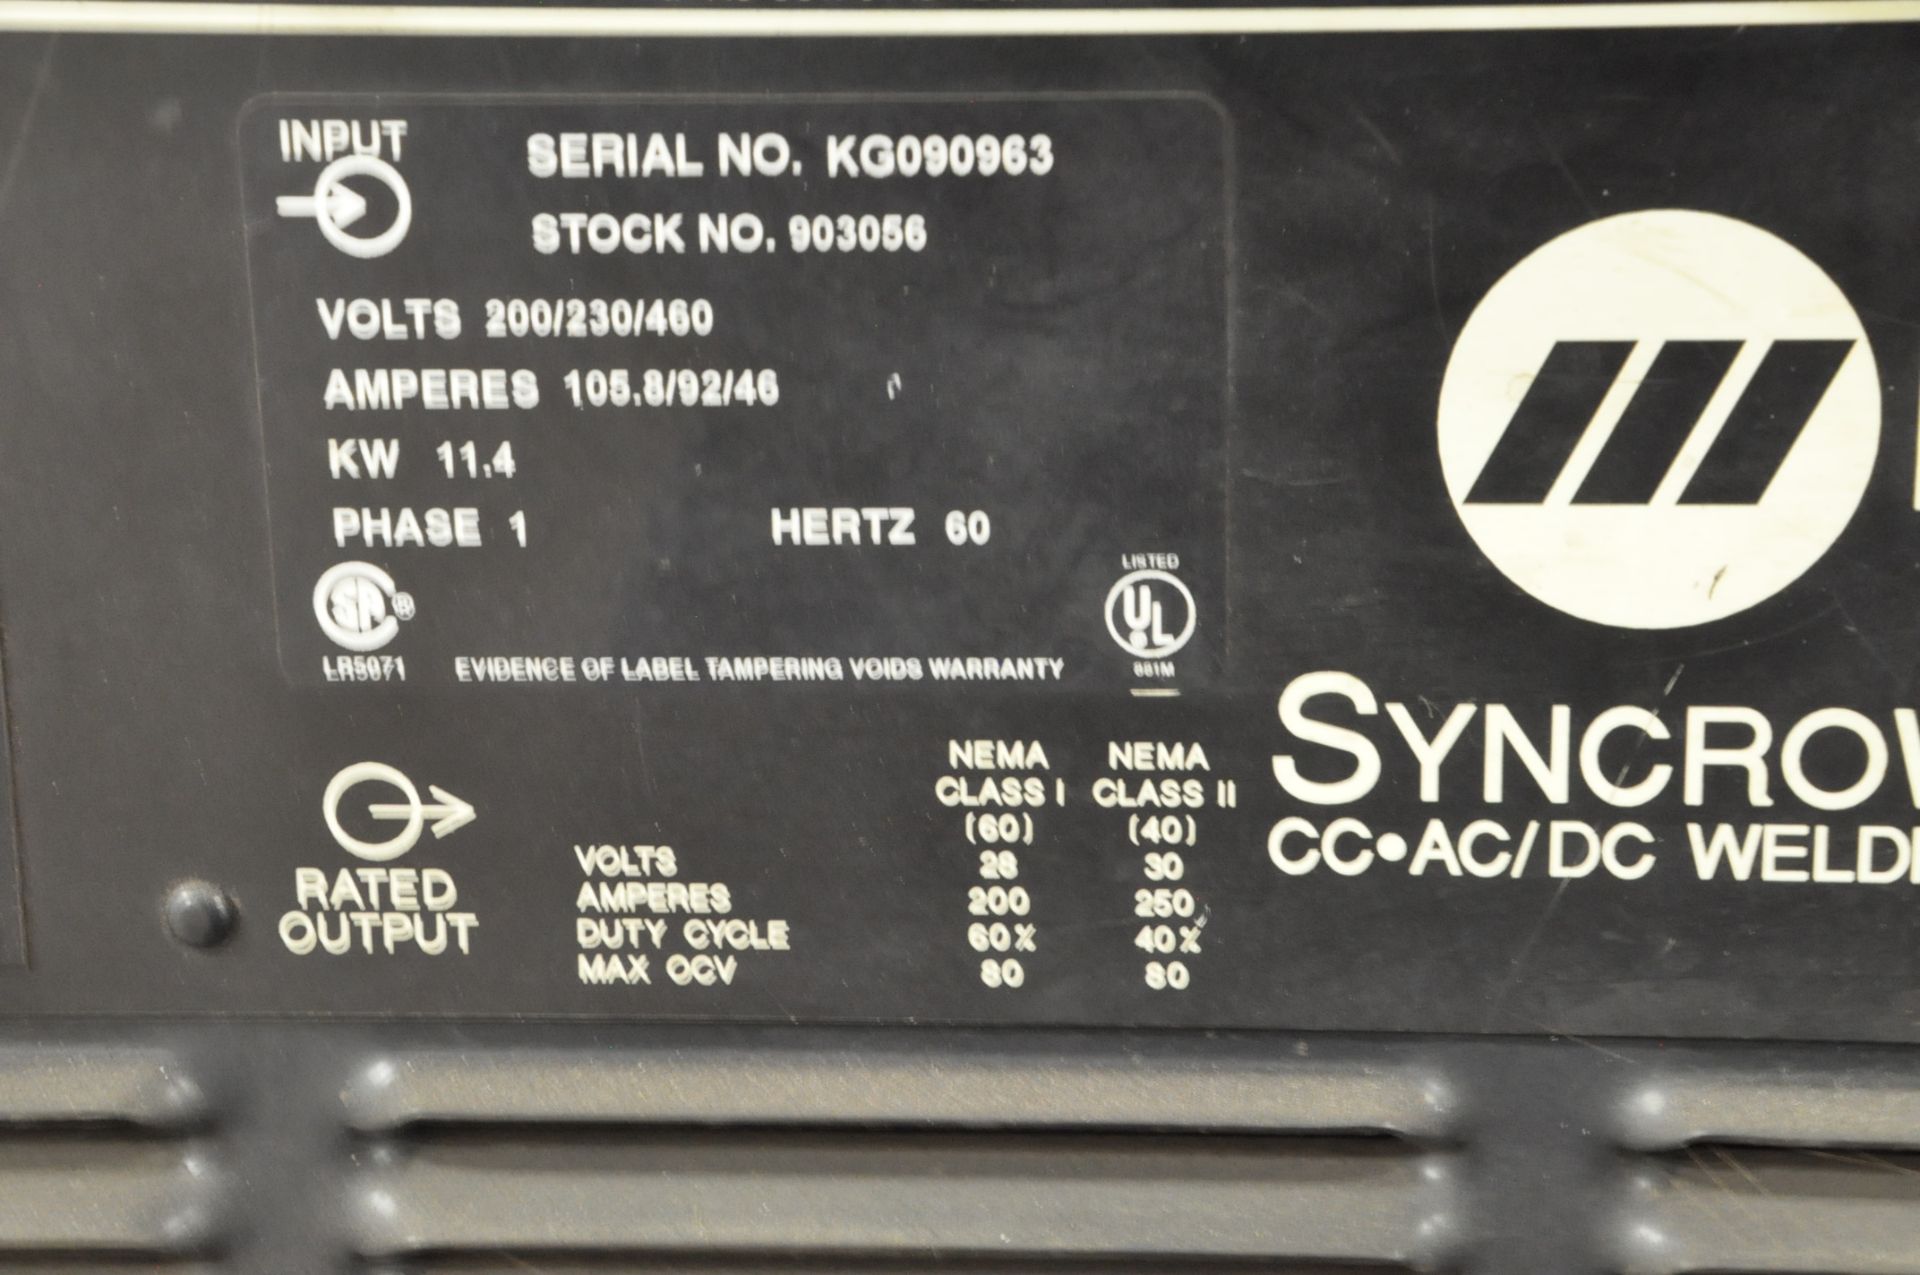 Miller Syncrowave 250, CC AC/DC Tig Welder, S/n KG090963 (1996), with Leads - Image 4 of 4